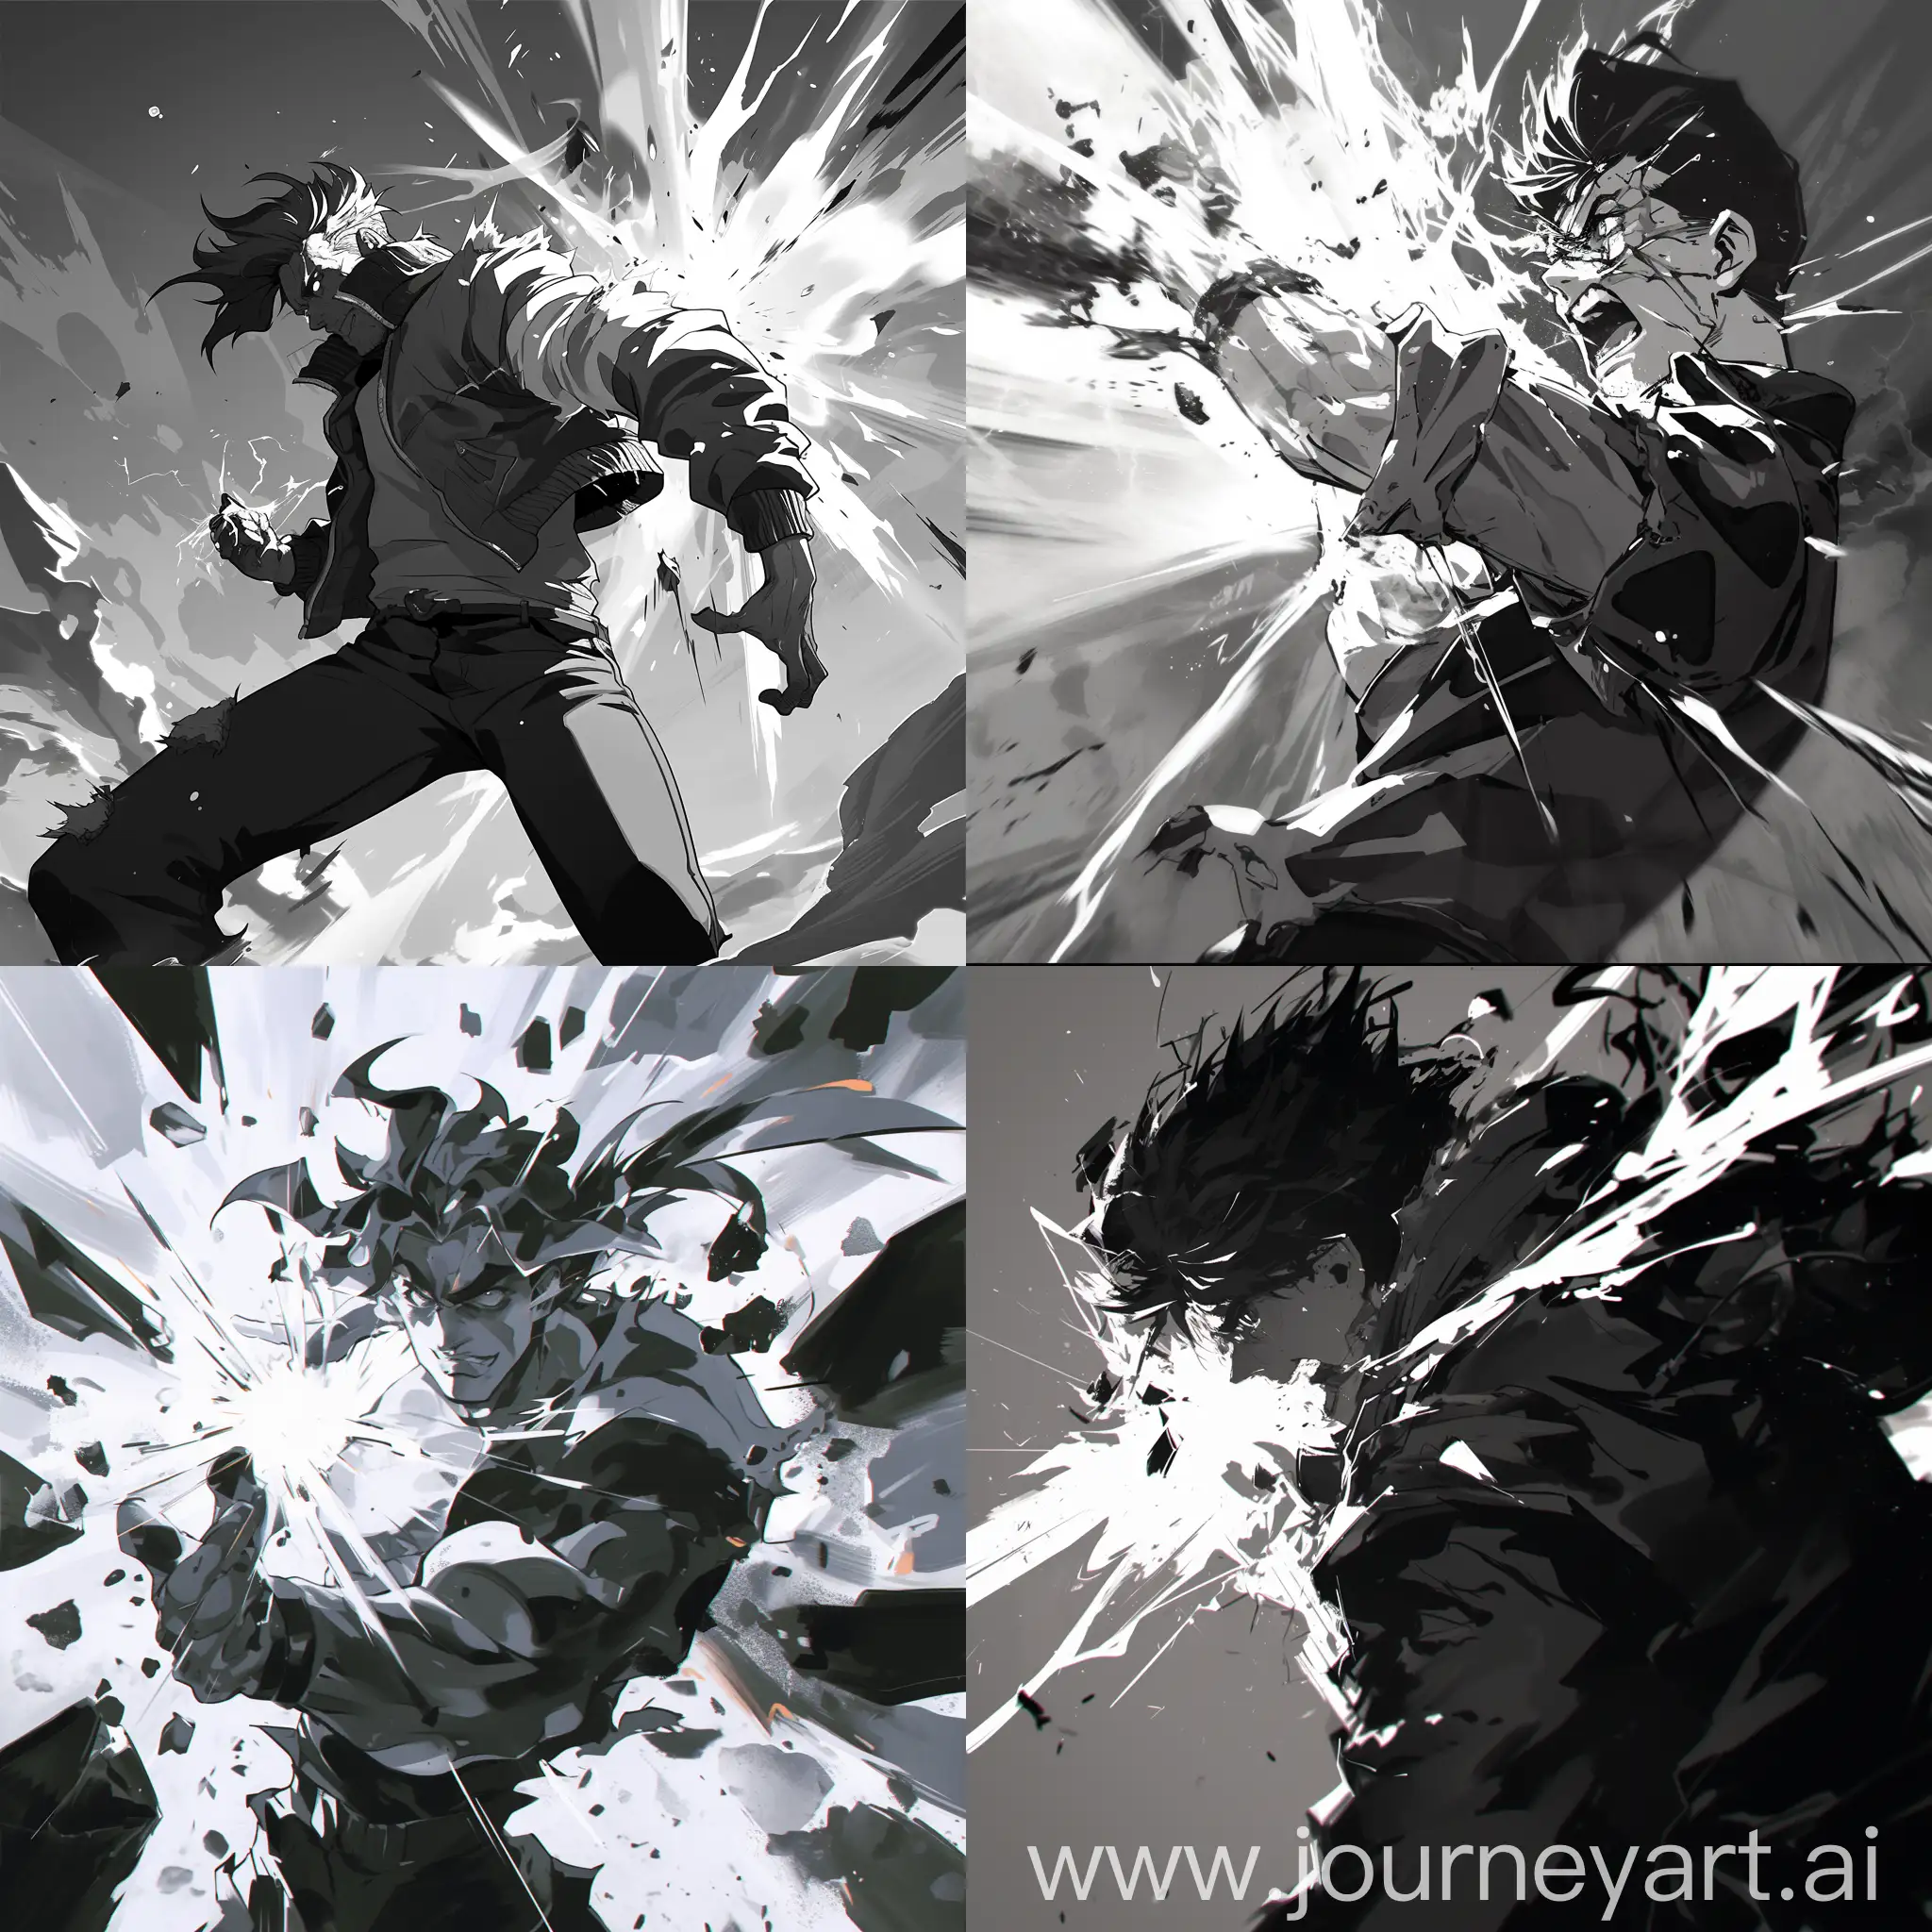 Intense-90s-Anime-Style-Brutal-Man-with-Explosive-Effects-in-Monochrome